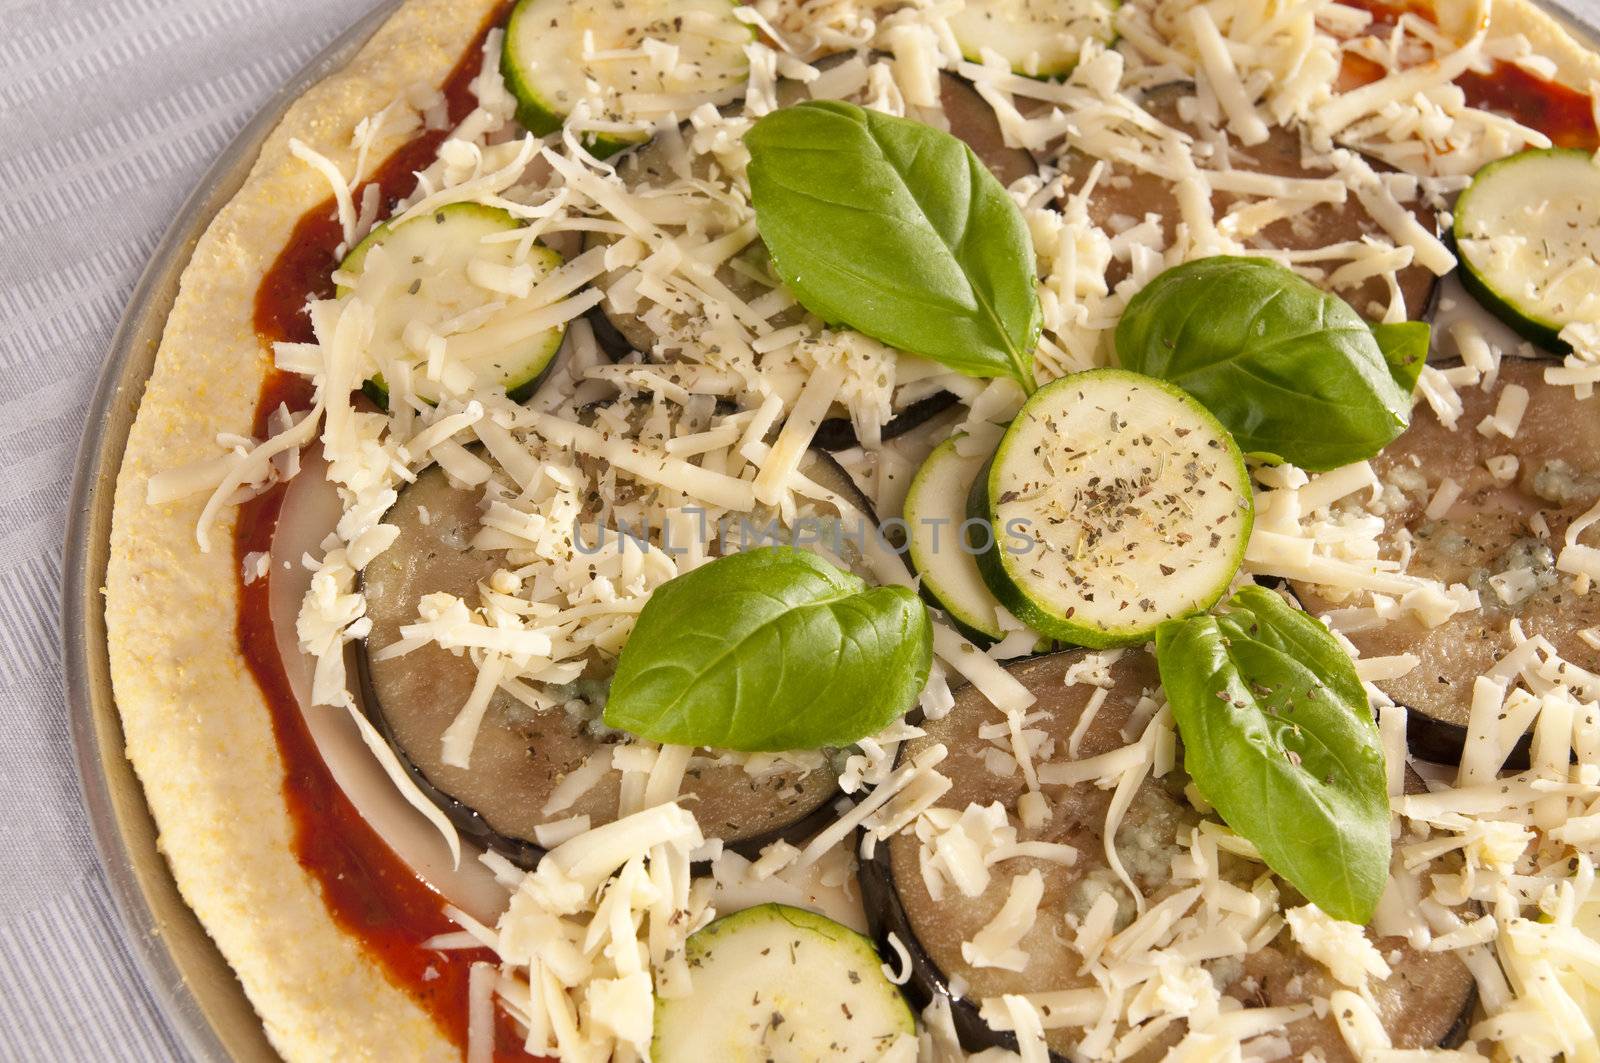 Uncooked pizza with eggplant and zucchini topping